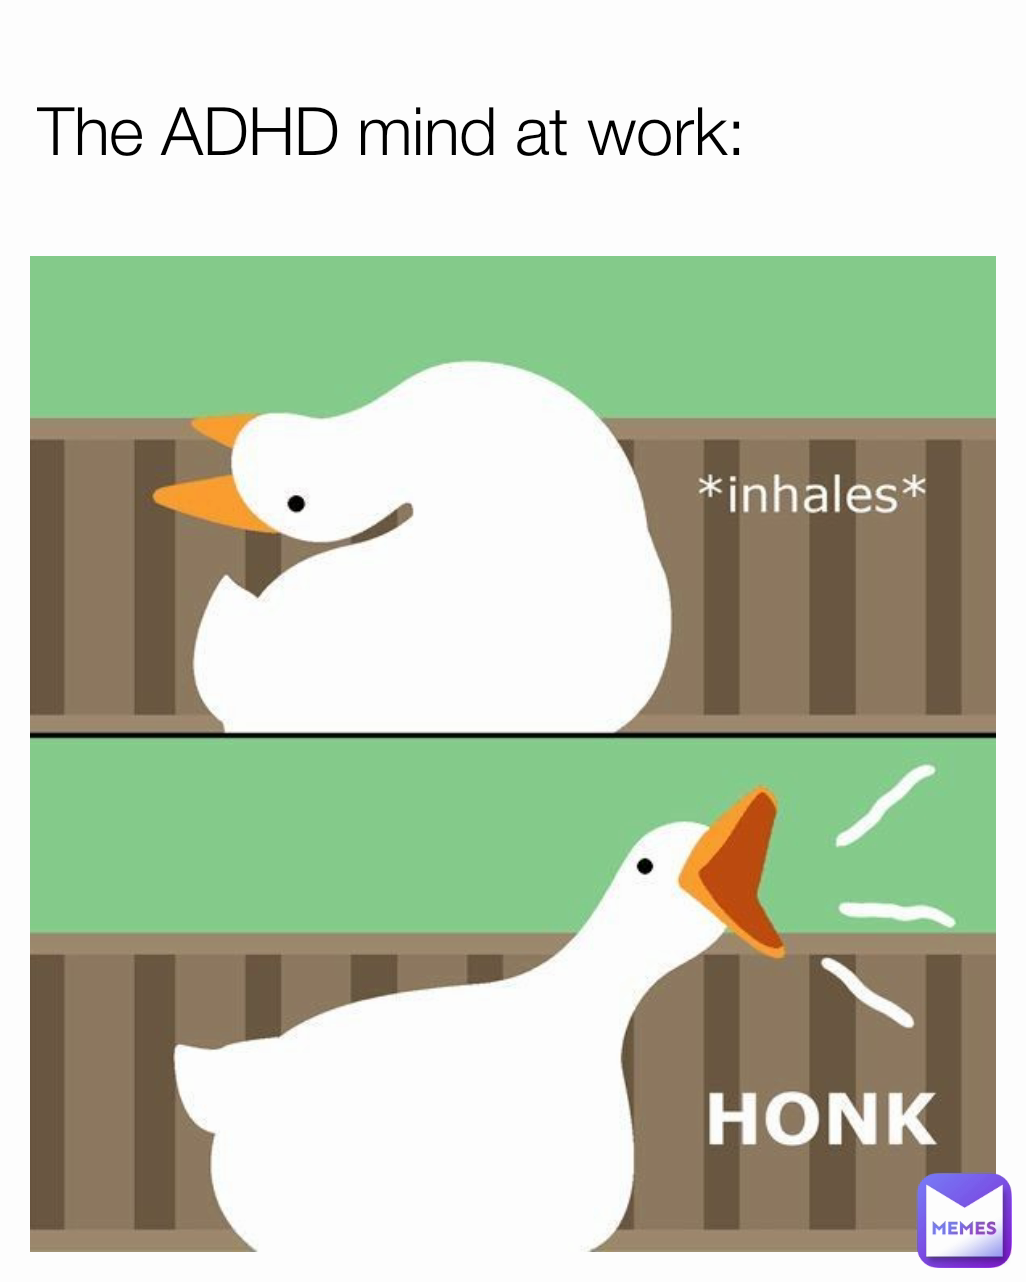 The ADHD mind at work: